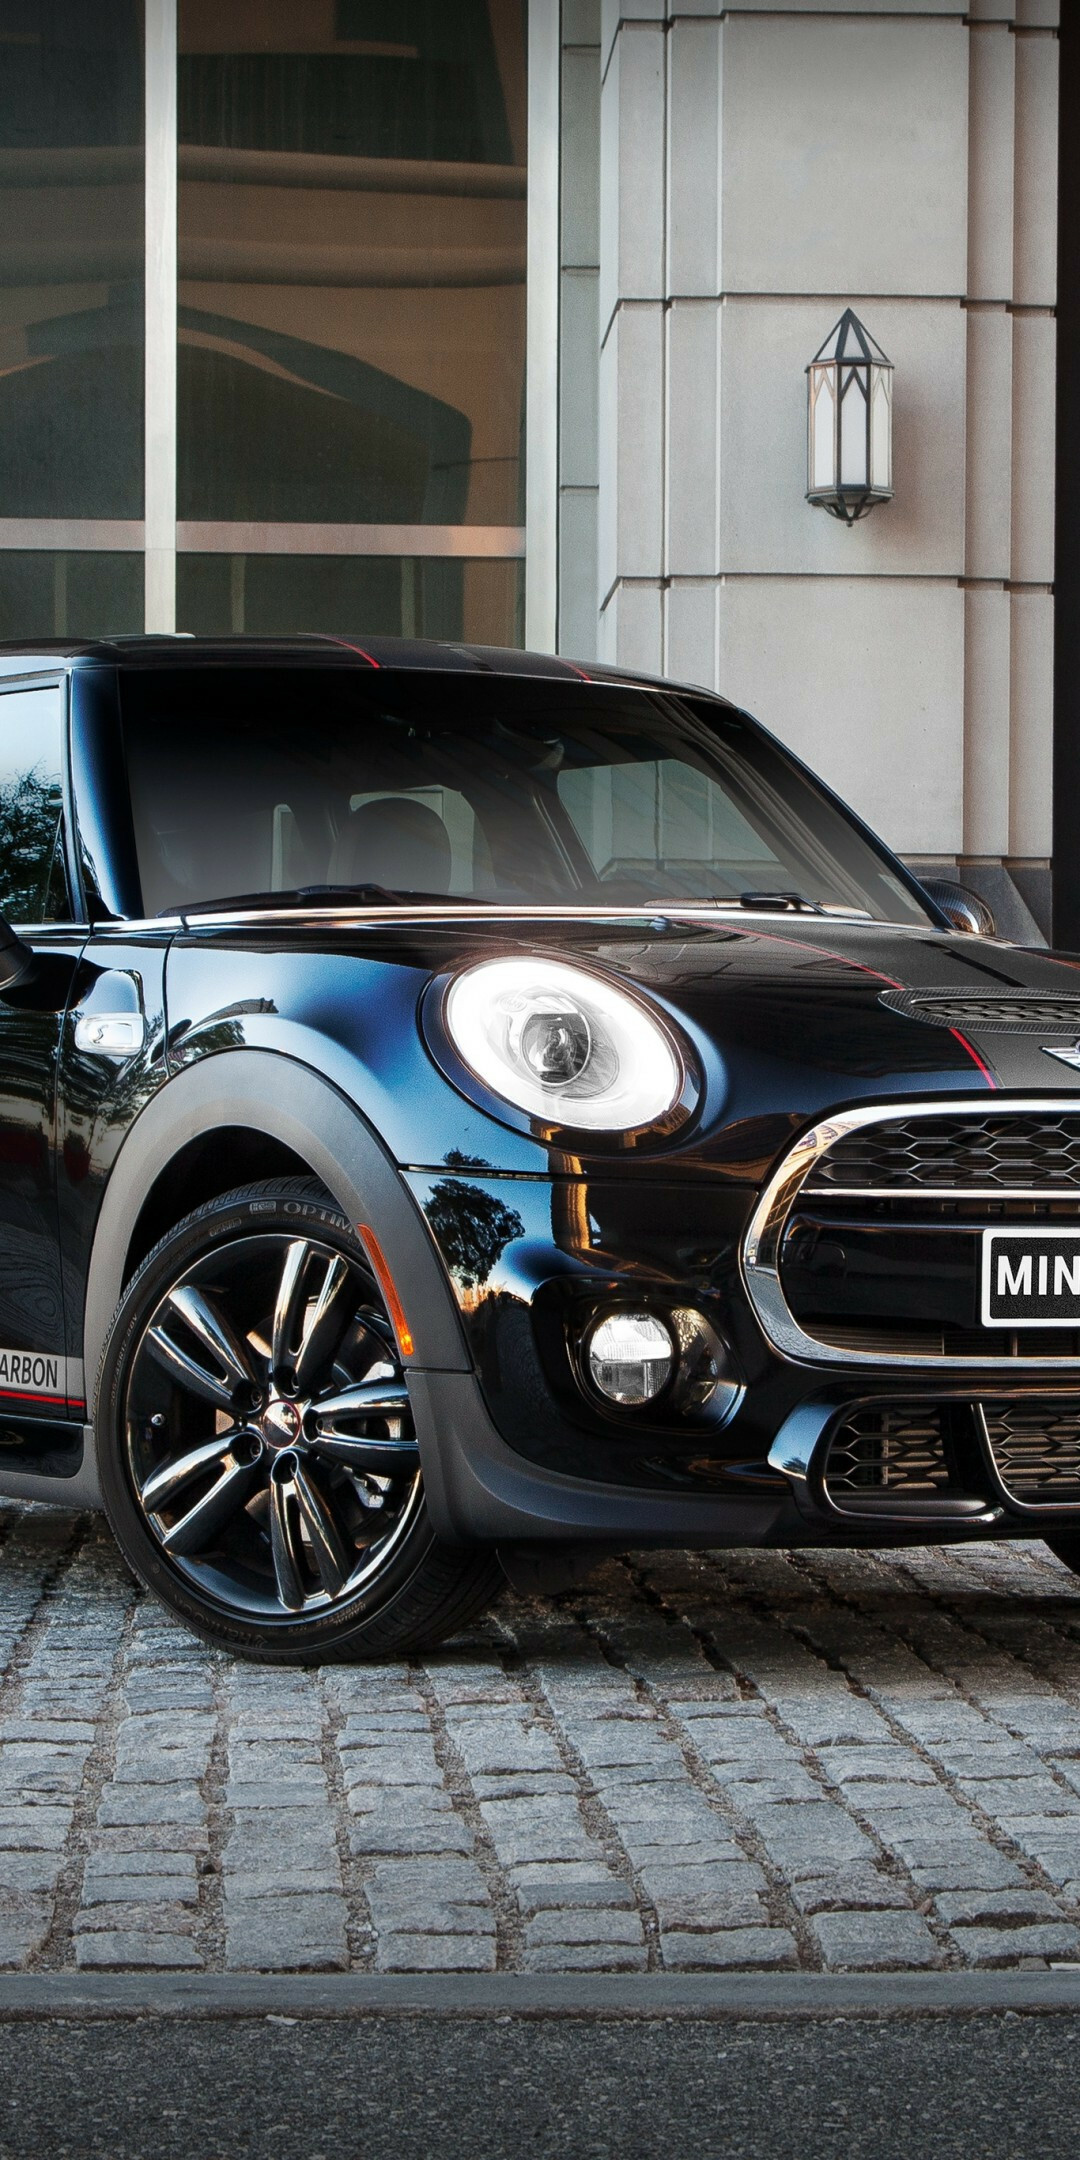 MINI Cooper: Model S, Cars, The Mark IV was launched in 1976. 1080x2160 HD Wallpaper.